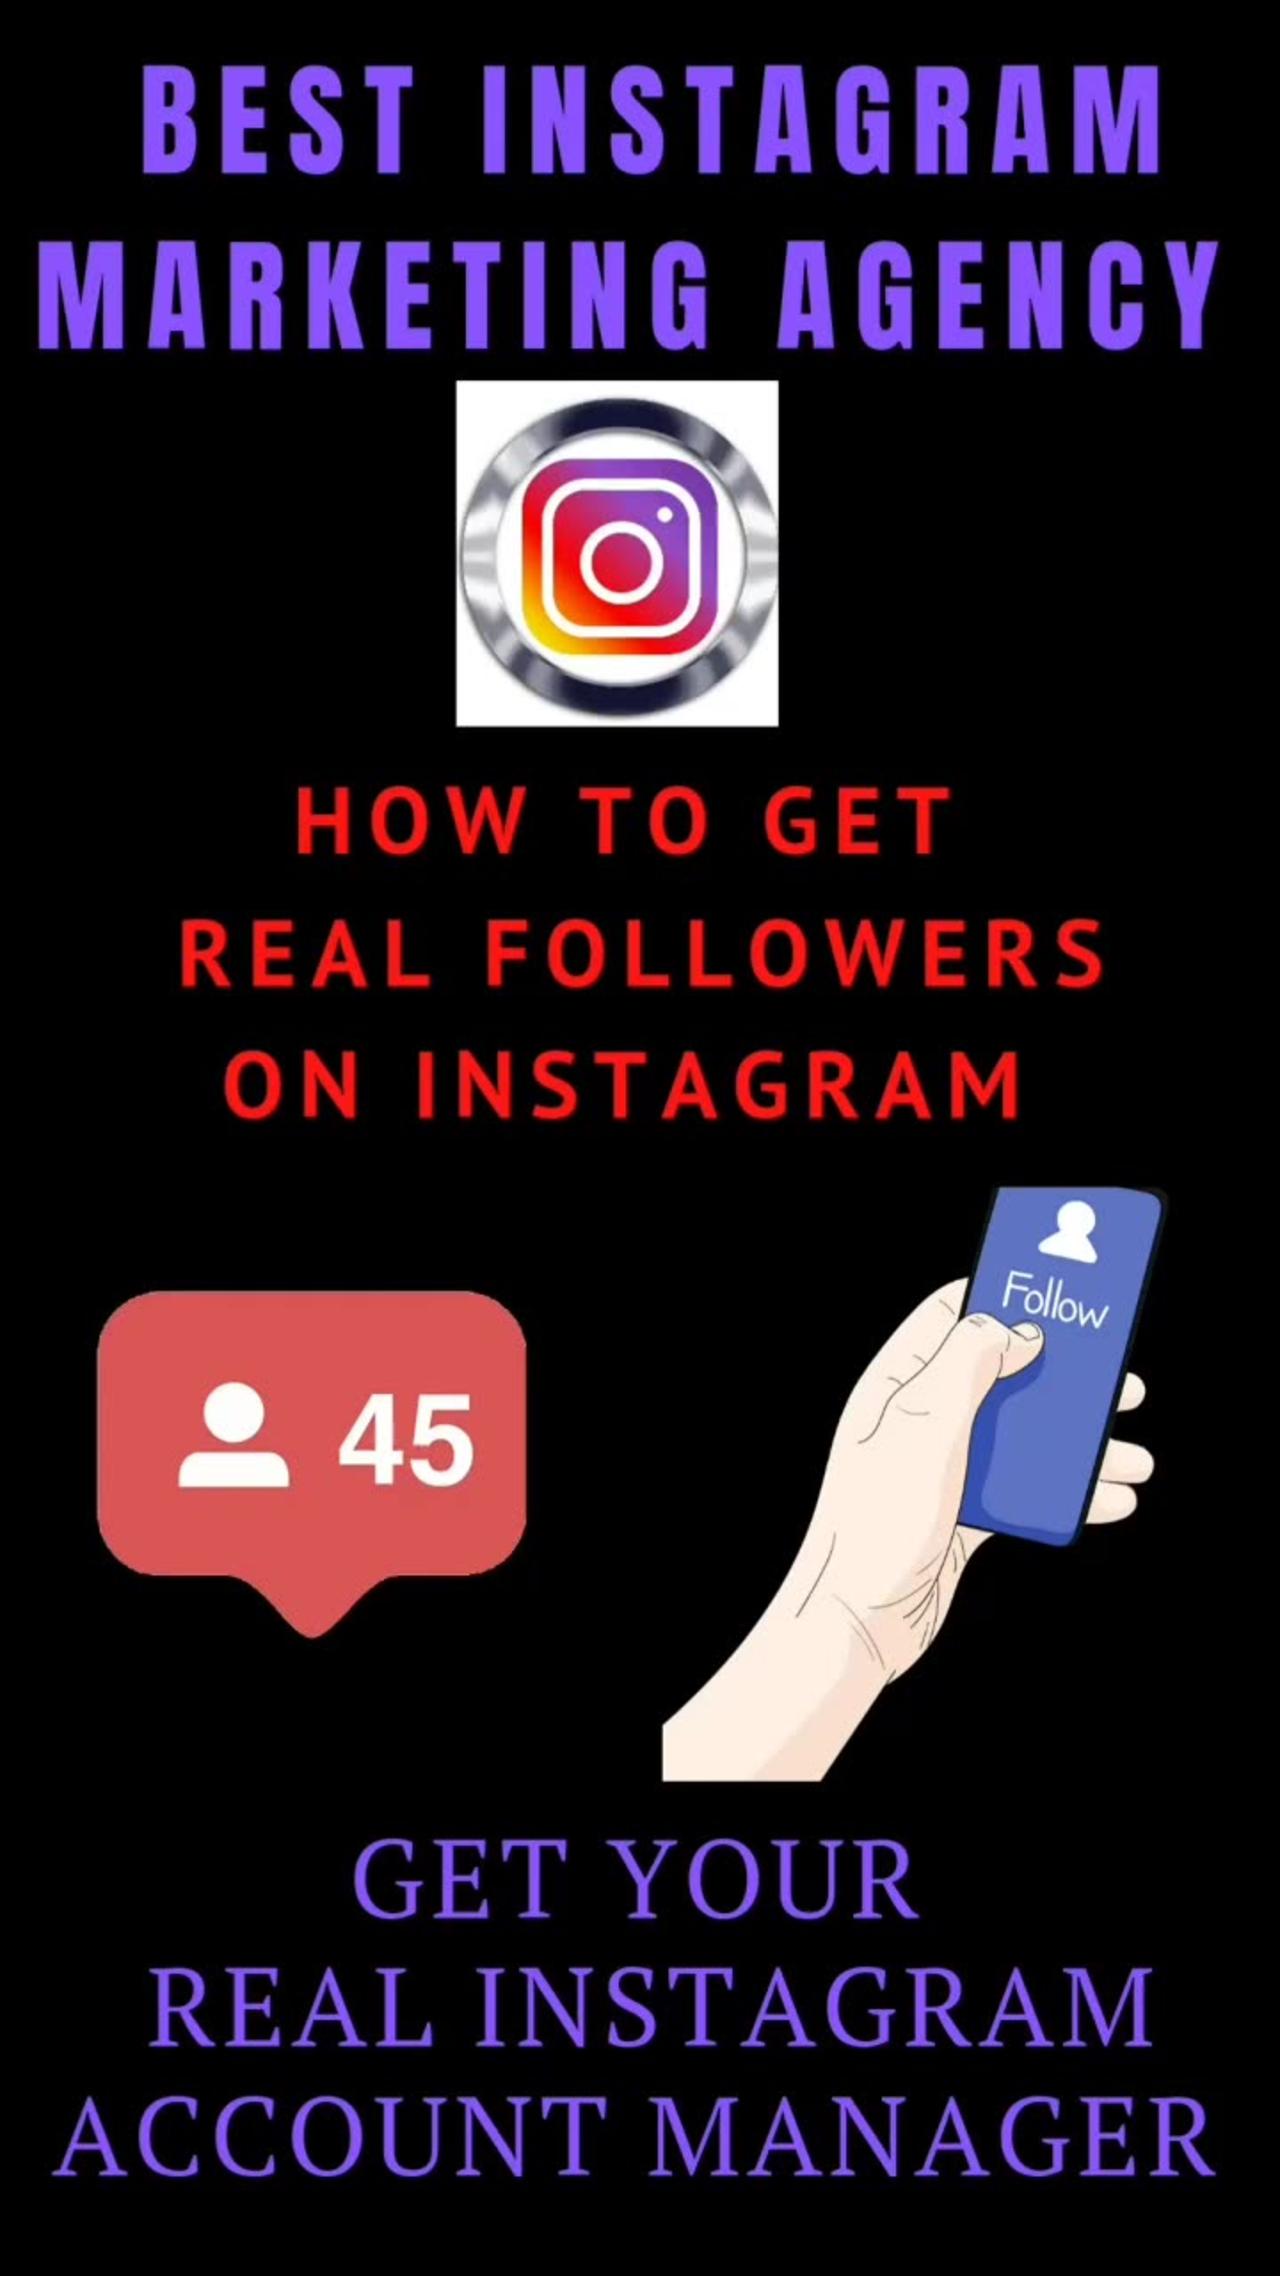 Get Your Real Instagram Account Manager